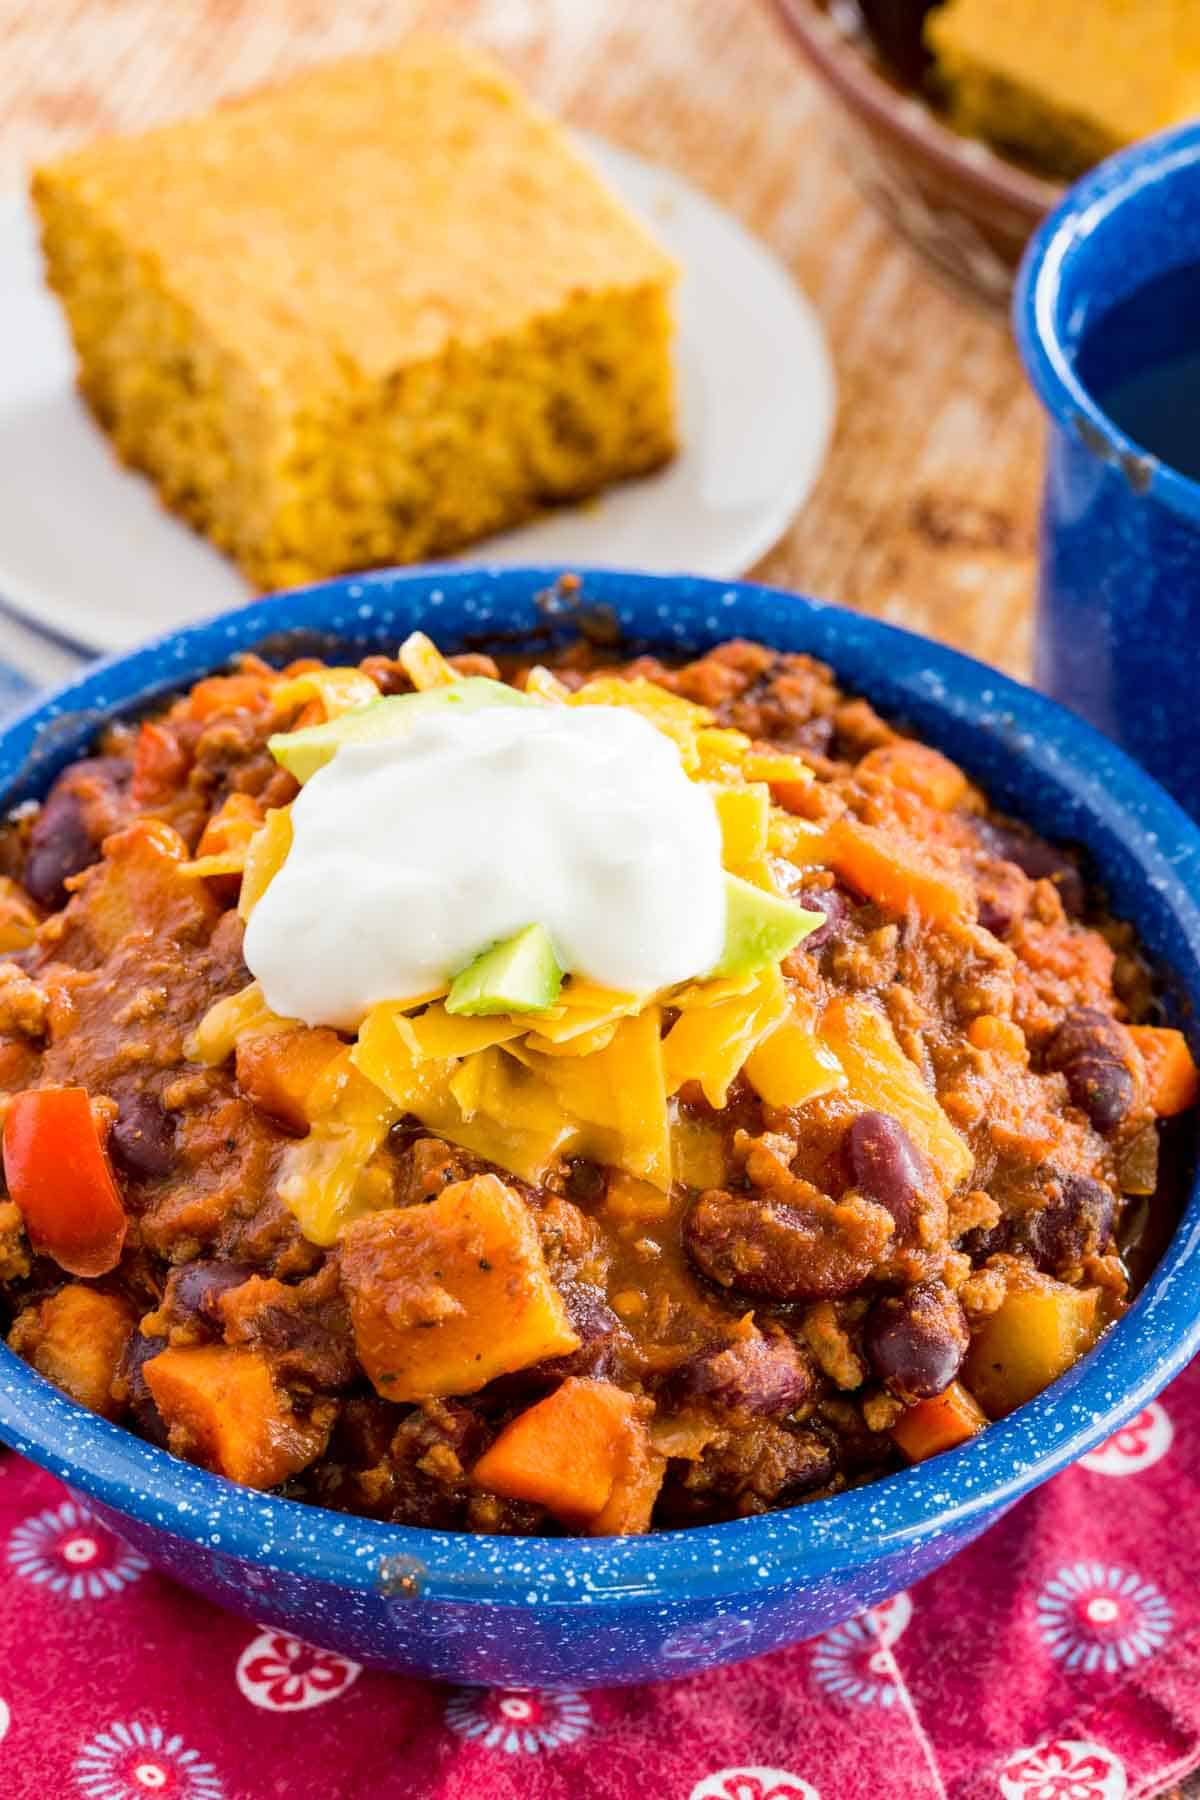 Slow cooker Aloha chili in a bowl topped with sour cream, with cornbread in the background.